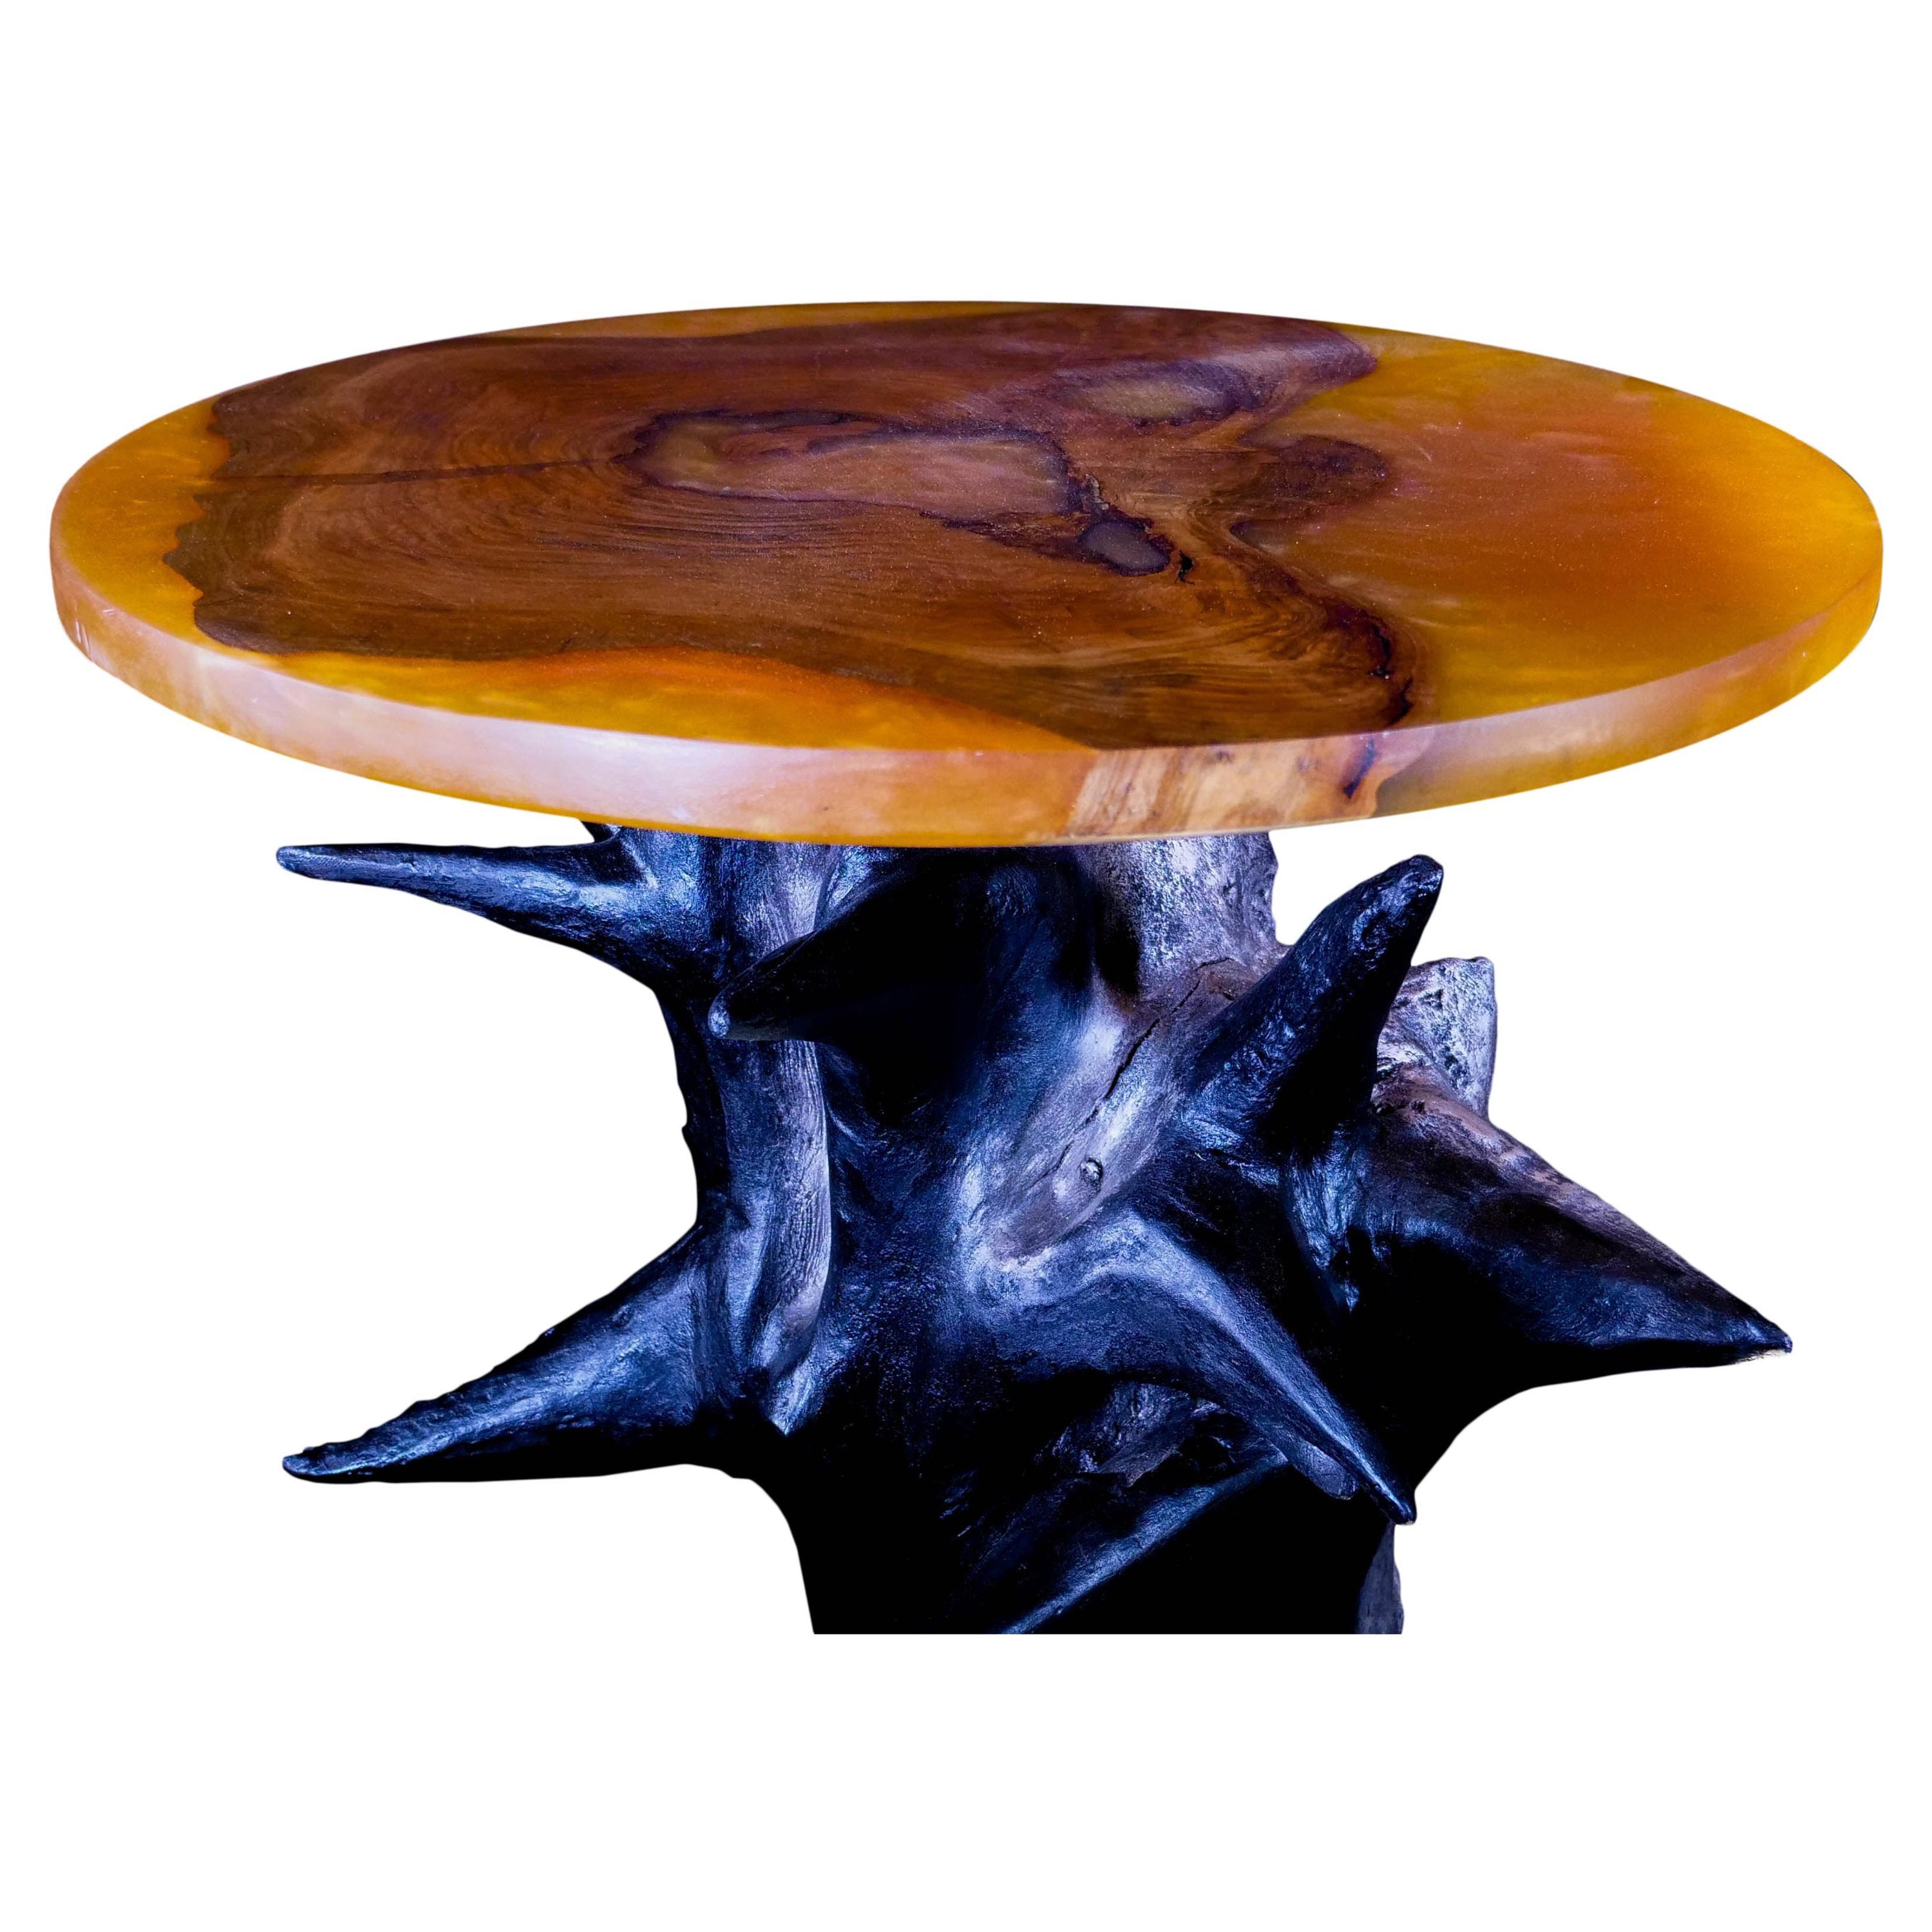 Aquila Cherry and Walnut Table by Biome Design For Sale